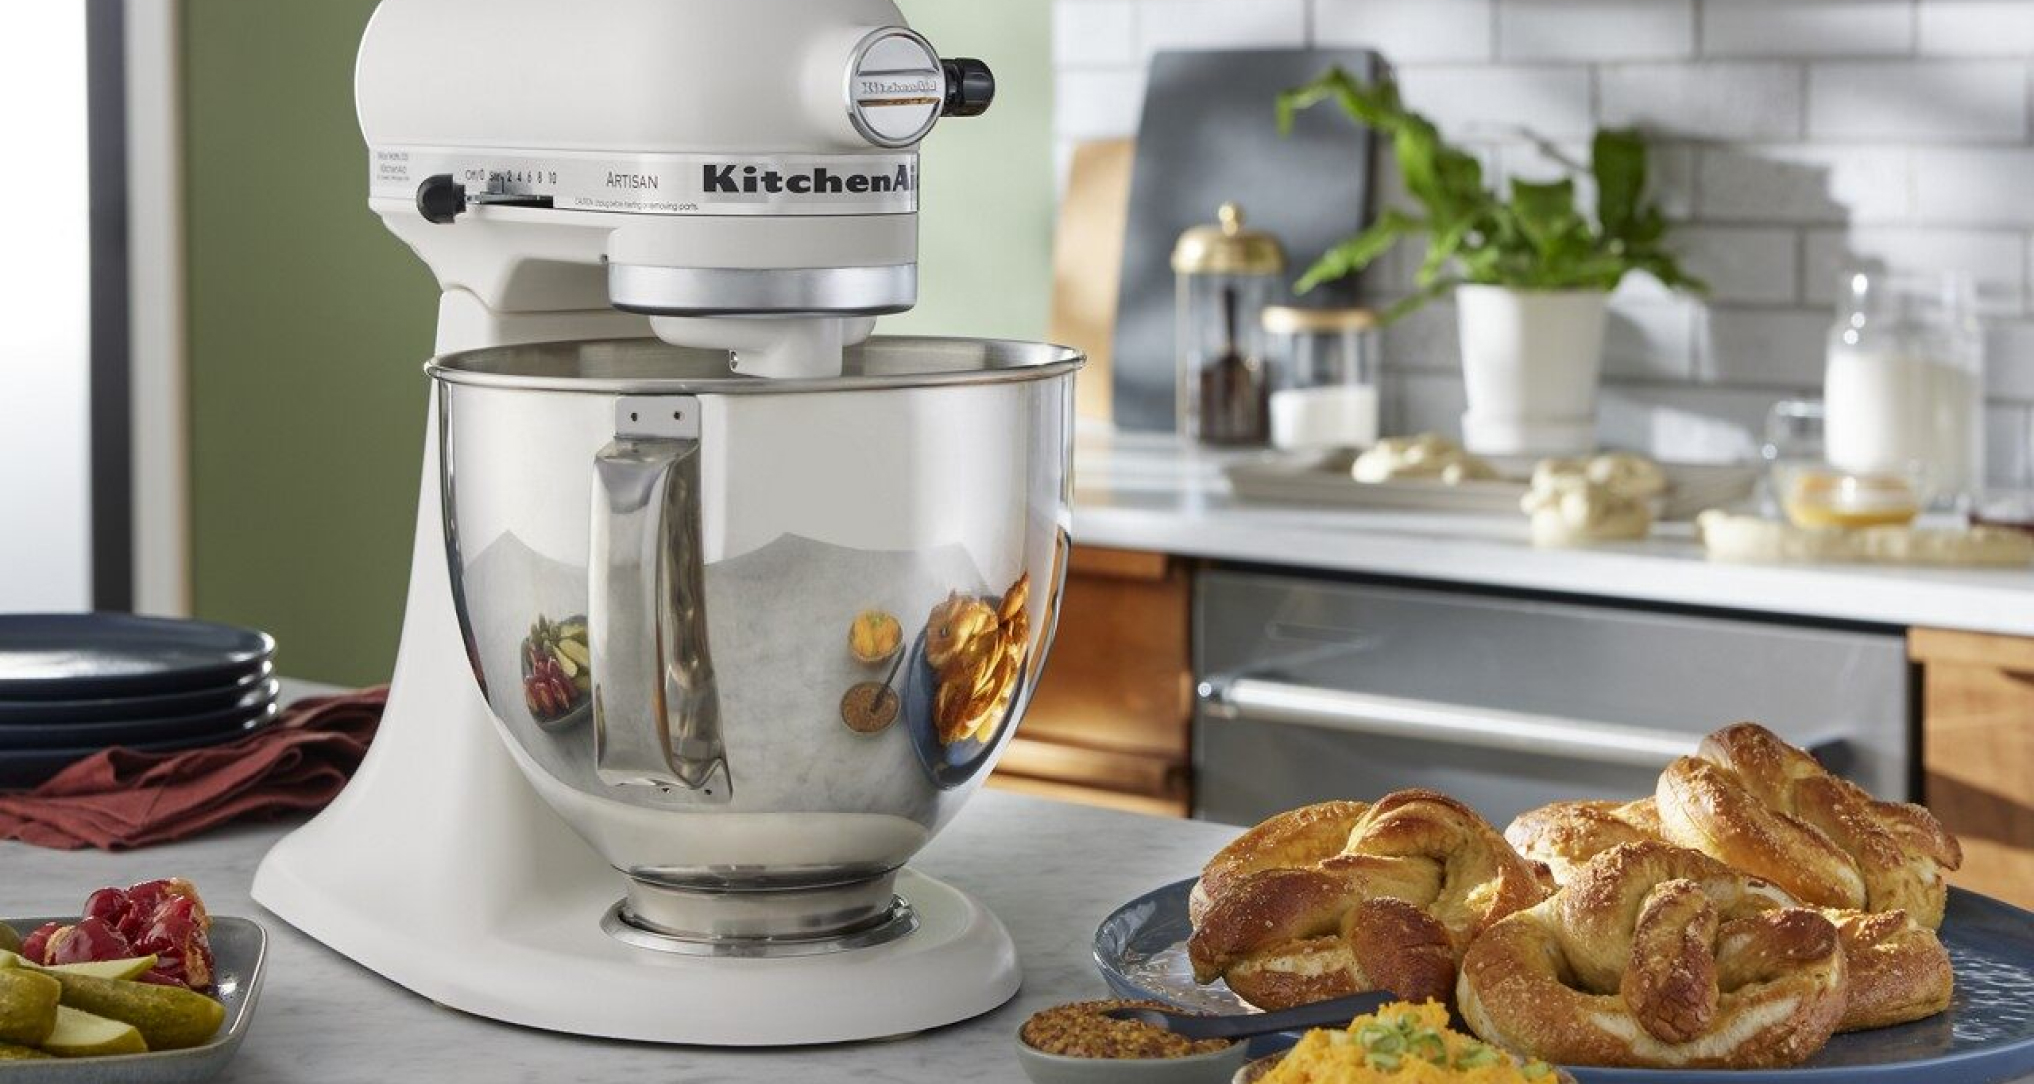 A KitchenAid® Porcelain White Stand Mixer on a countertop next to prepared braided bread.